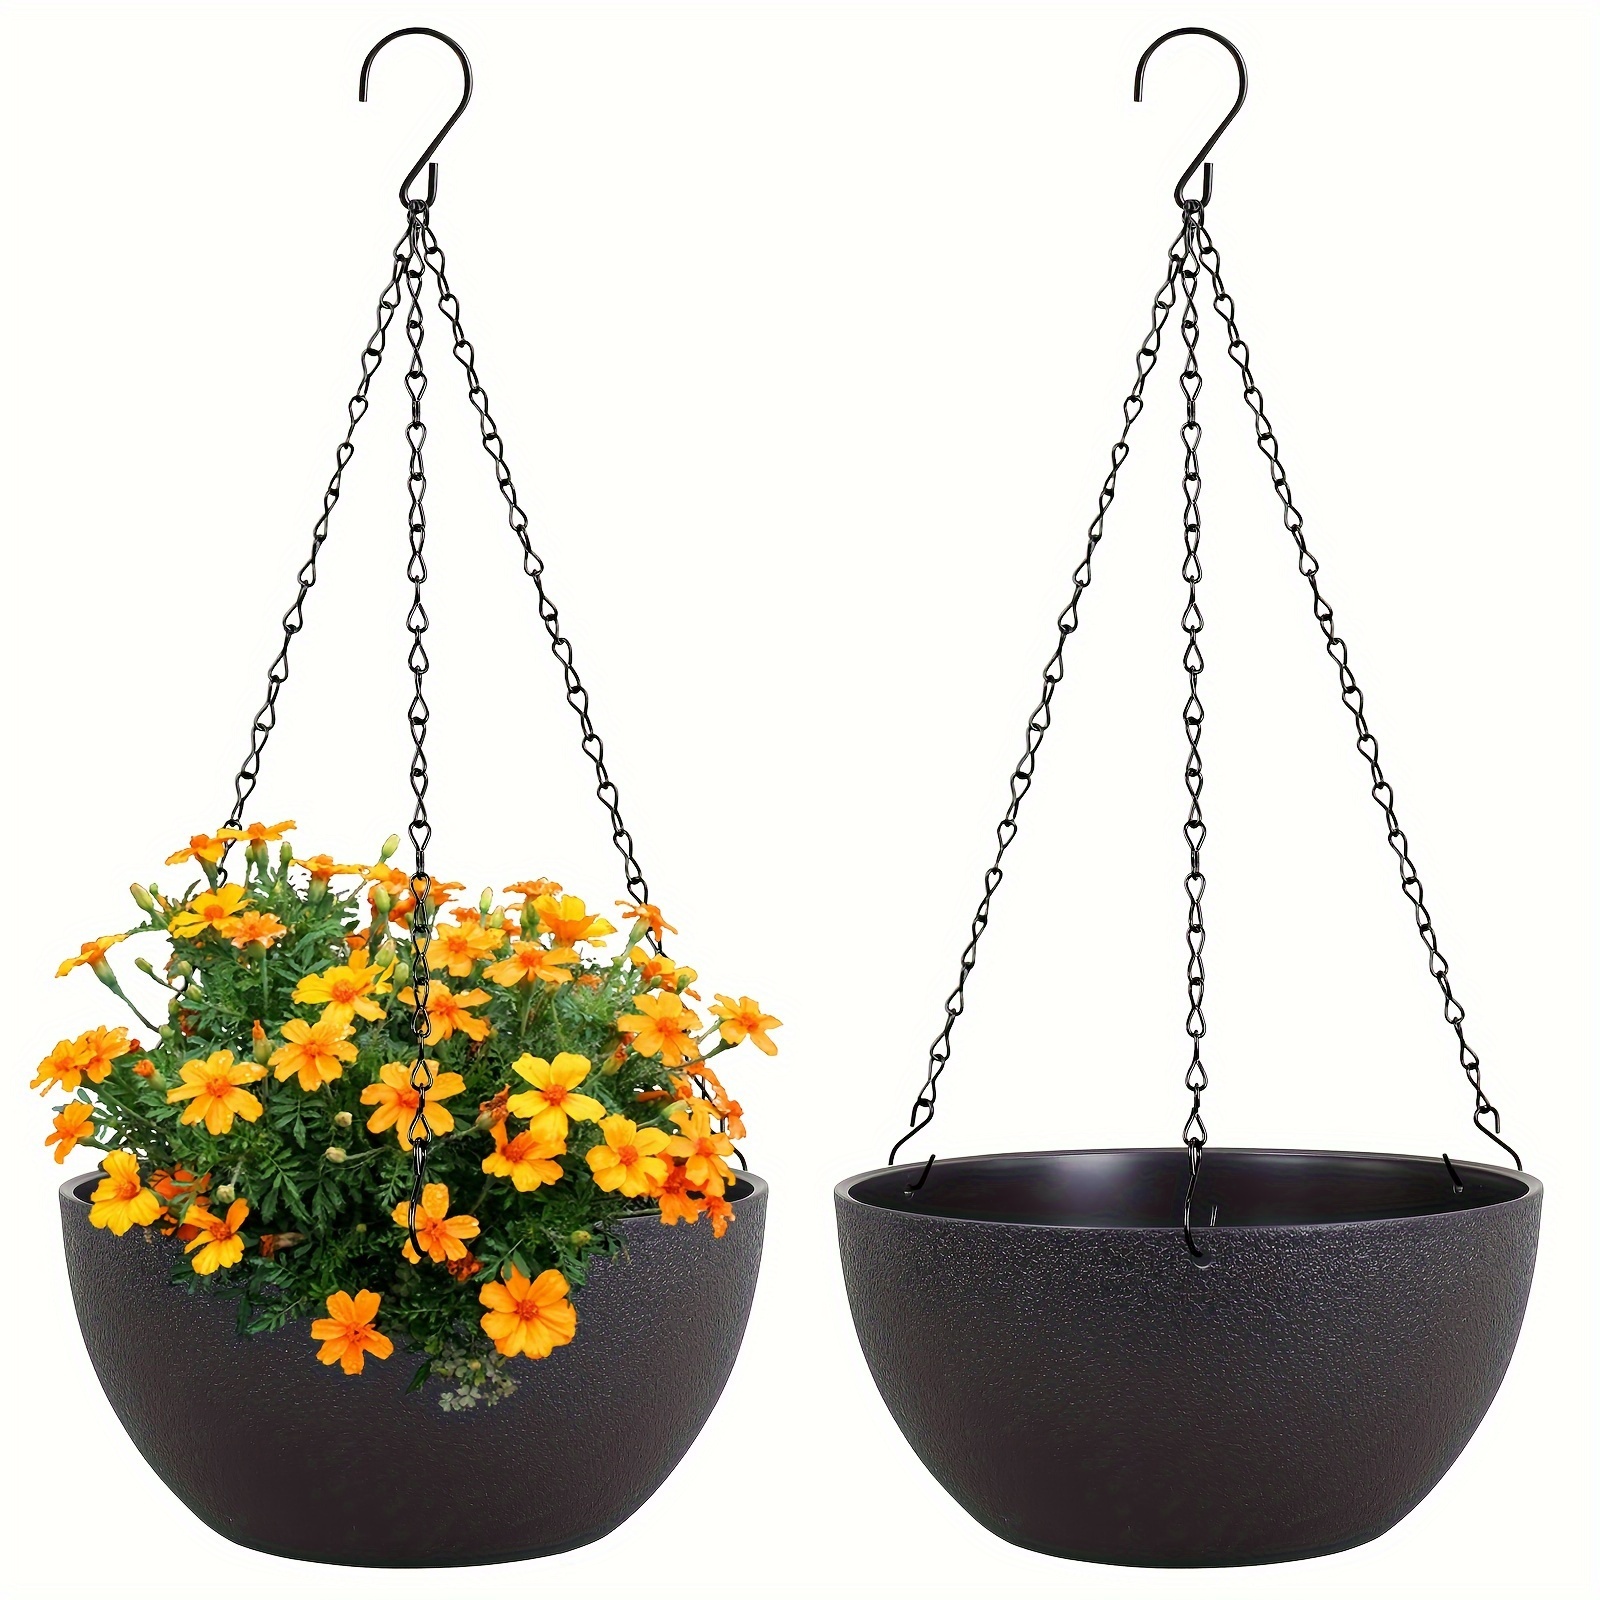 

2pcs, Ten-inch Hanging Pots Flower Pot Indoor Modern Decorative Pots For Plants With Drainage Hole And Tray For All House Plants, Succulents, Flowers, And Cactus